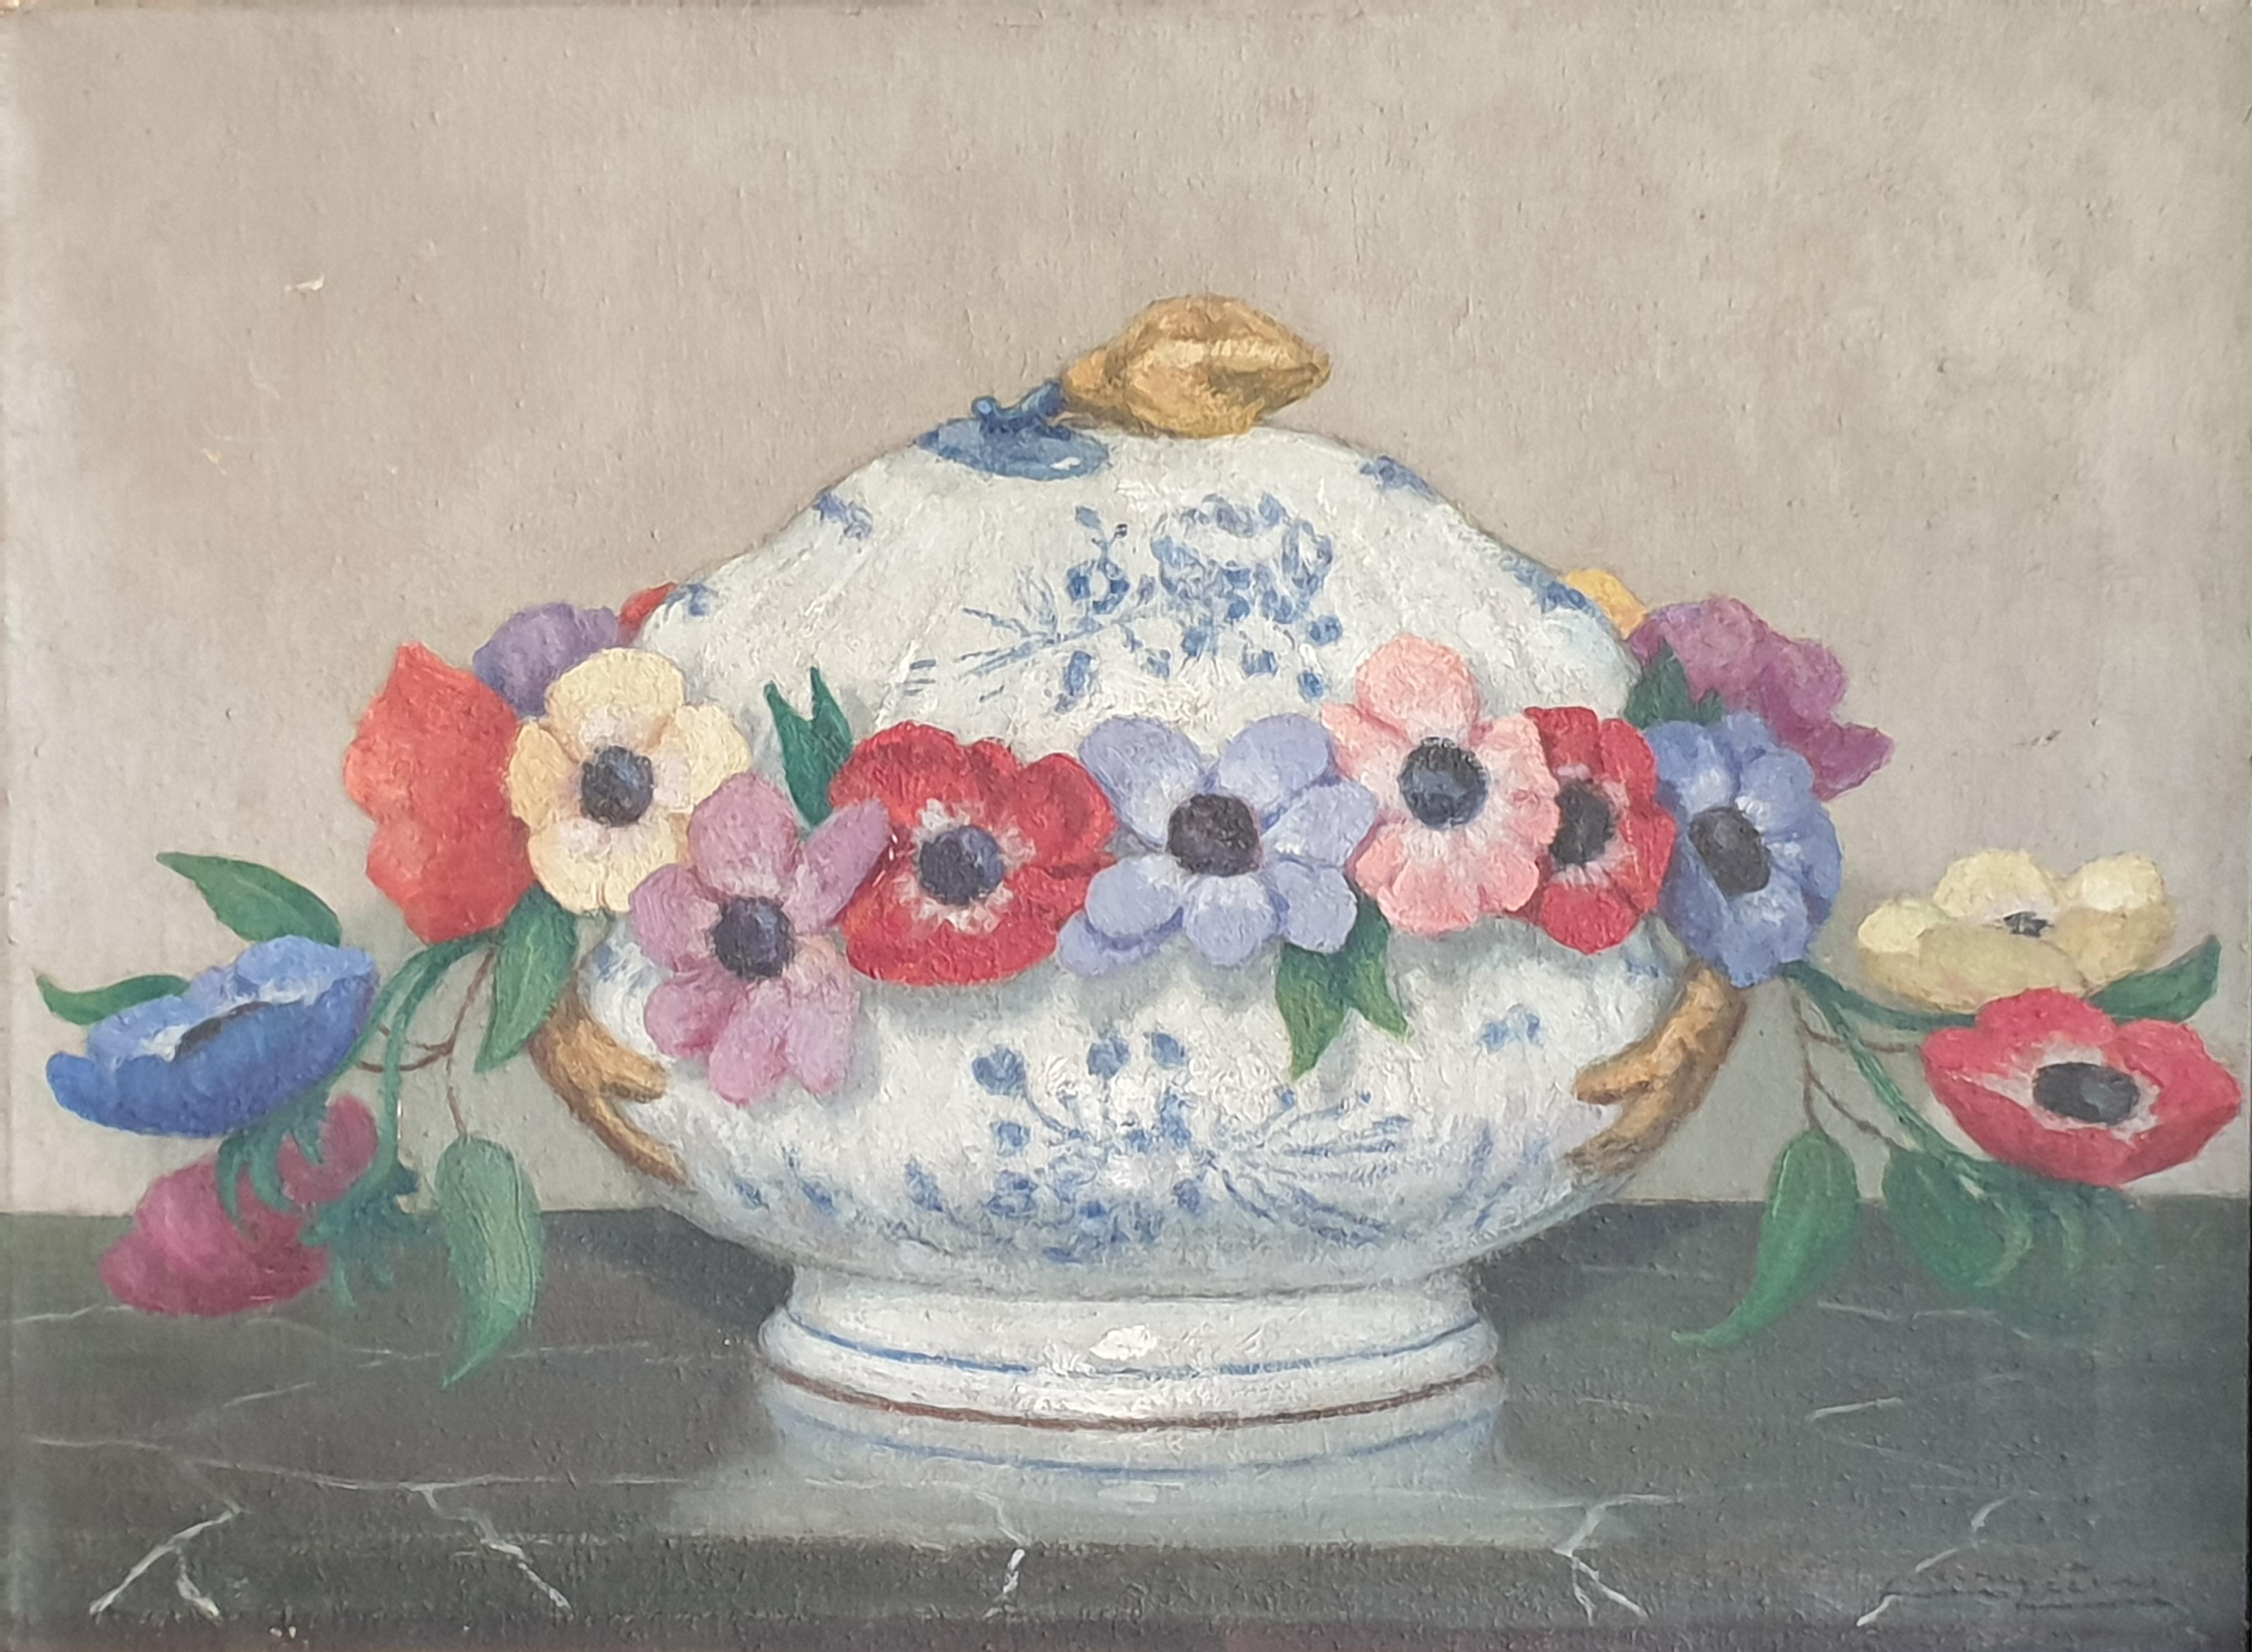 Early 20th century Impressionist still life of flowers in a Faïance tureen. Signed bottom right by the artist but as yet undeciphered. Presented in a period painted wooden frame.

A thoroughly charming painting in subtle pastel tones of flowers